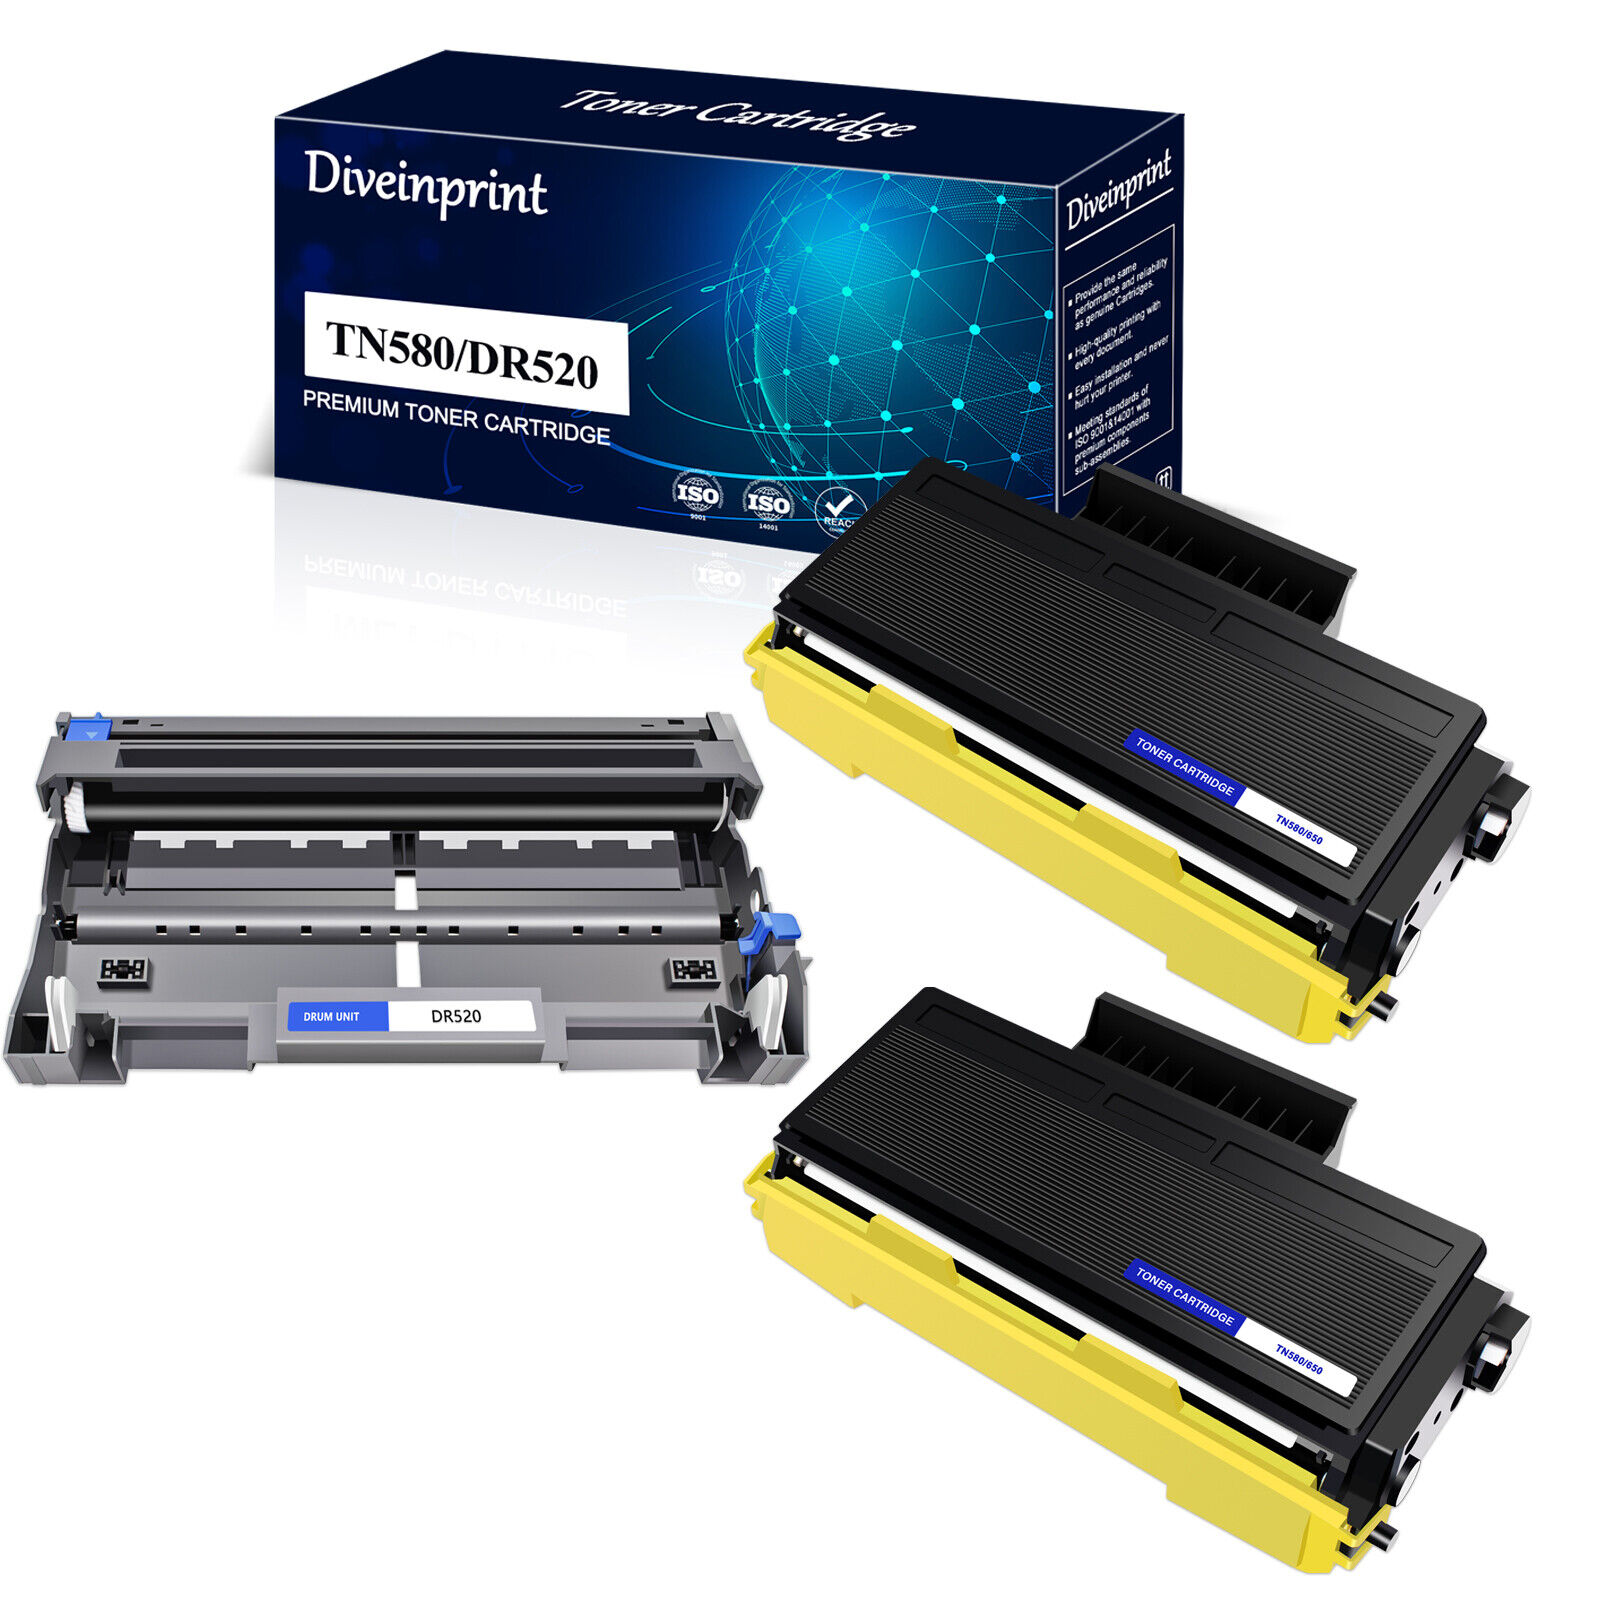 2PK TN580 Toner+1PK DR520 Drum for Brother DCP-8060 8065DN MFC-8660DN MFC-8690DW